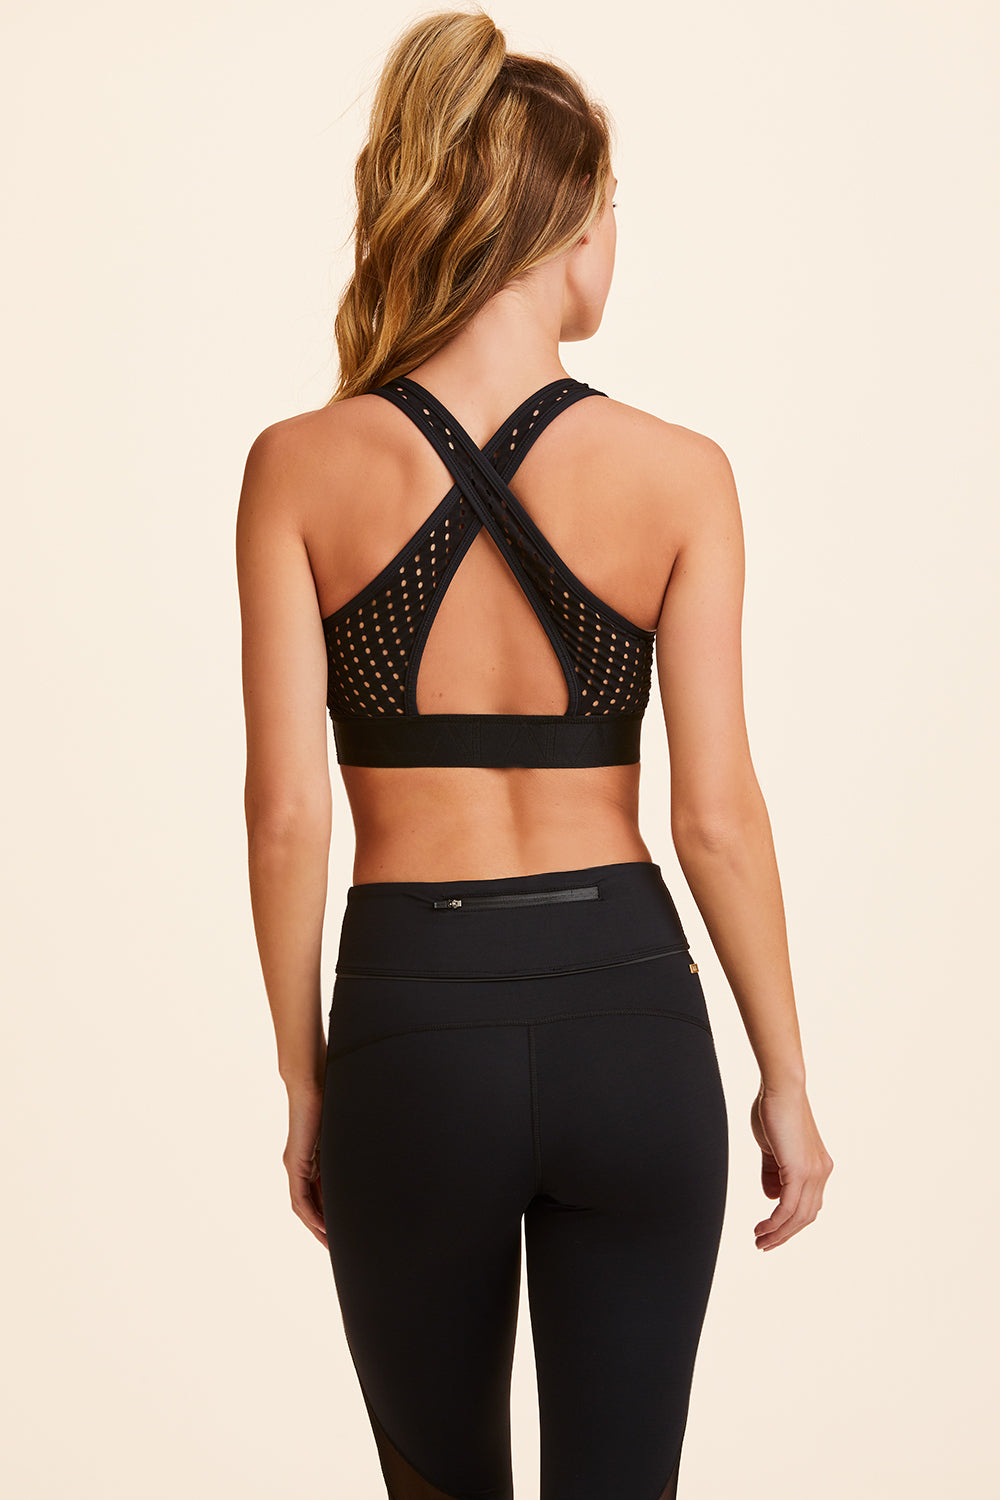 Back view of Alala Women's Luxury Athleisure black bra with cross back straps